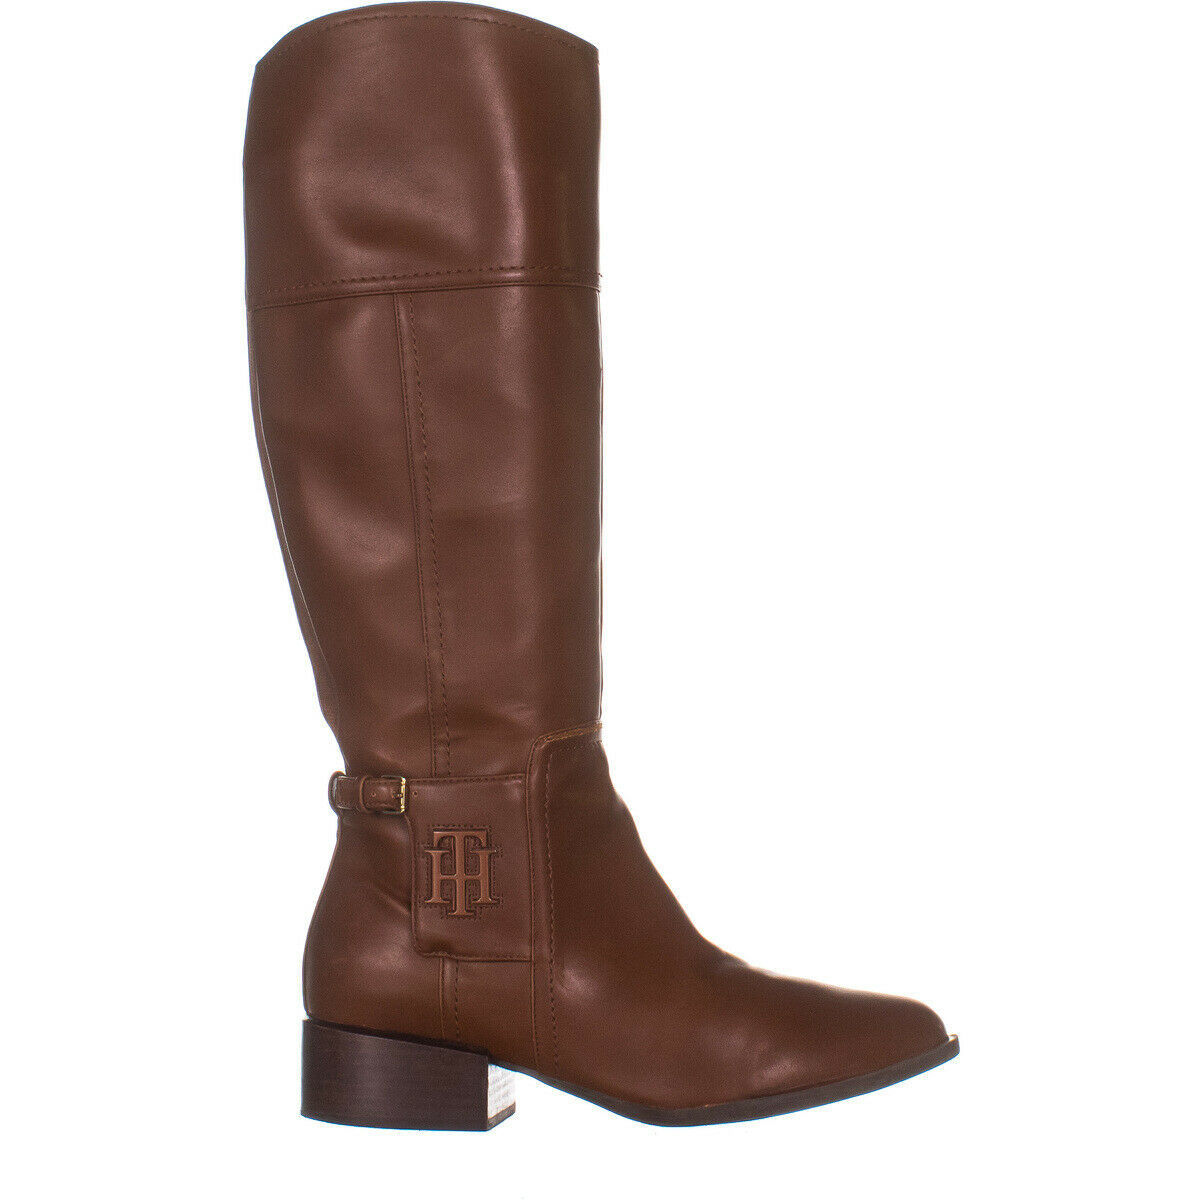 Tommy Hilfiger 302 Knee High Boots 736, Cognac, 8 US - Boots